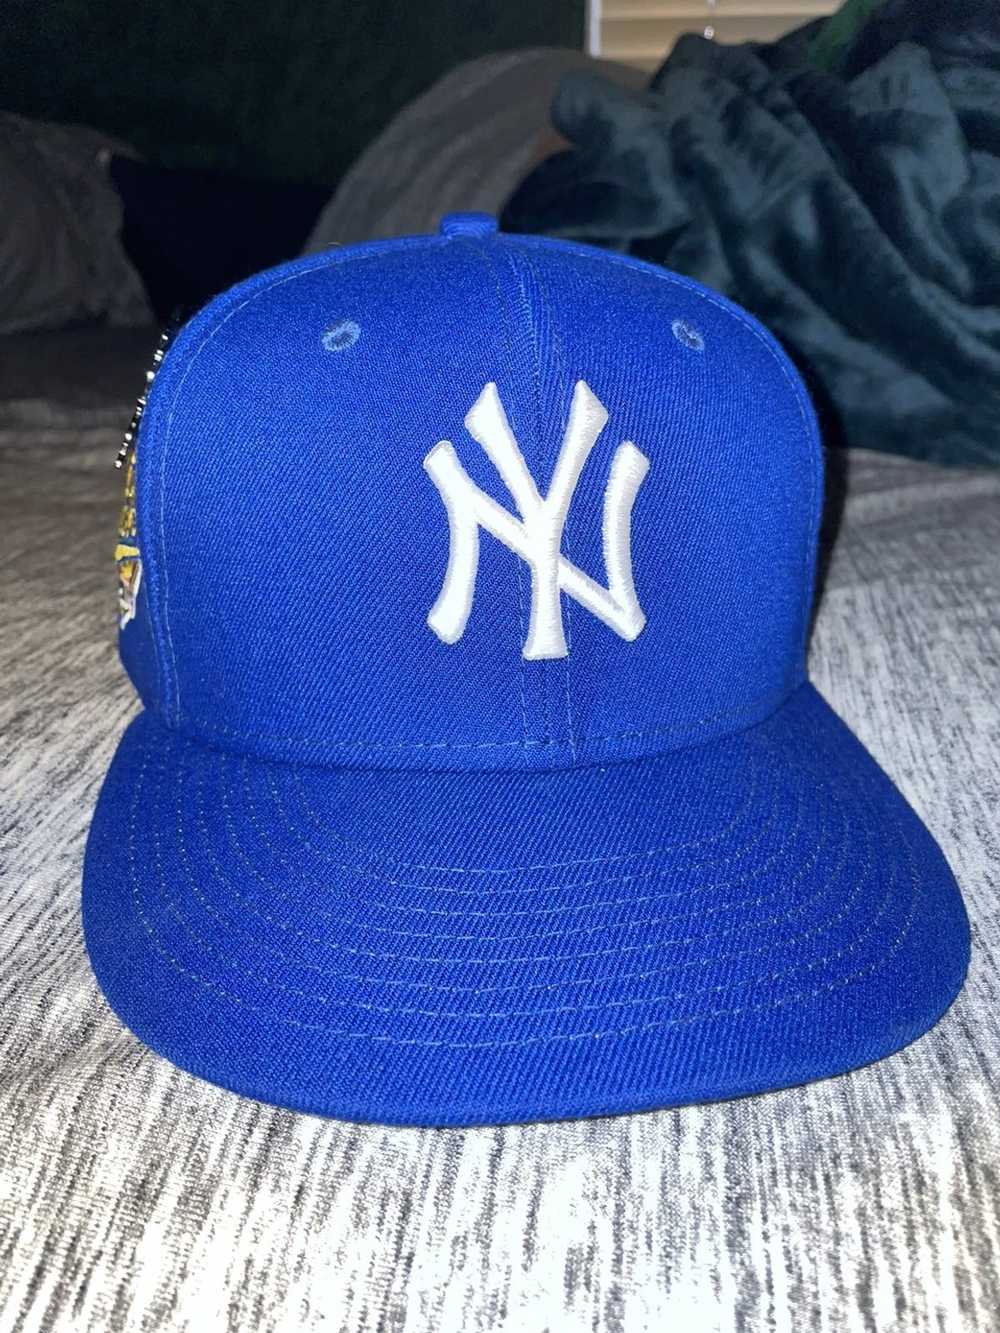 New Era 96 New York Yankees Fitted Cap in Yellow Size 712 | Jimmy Jazz